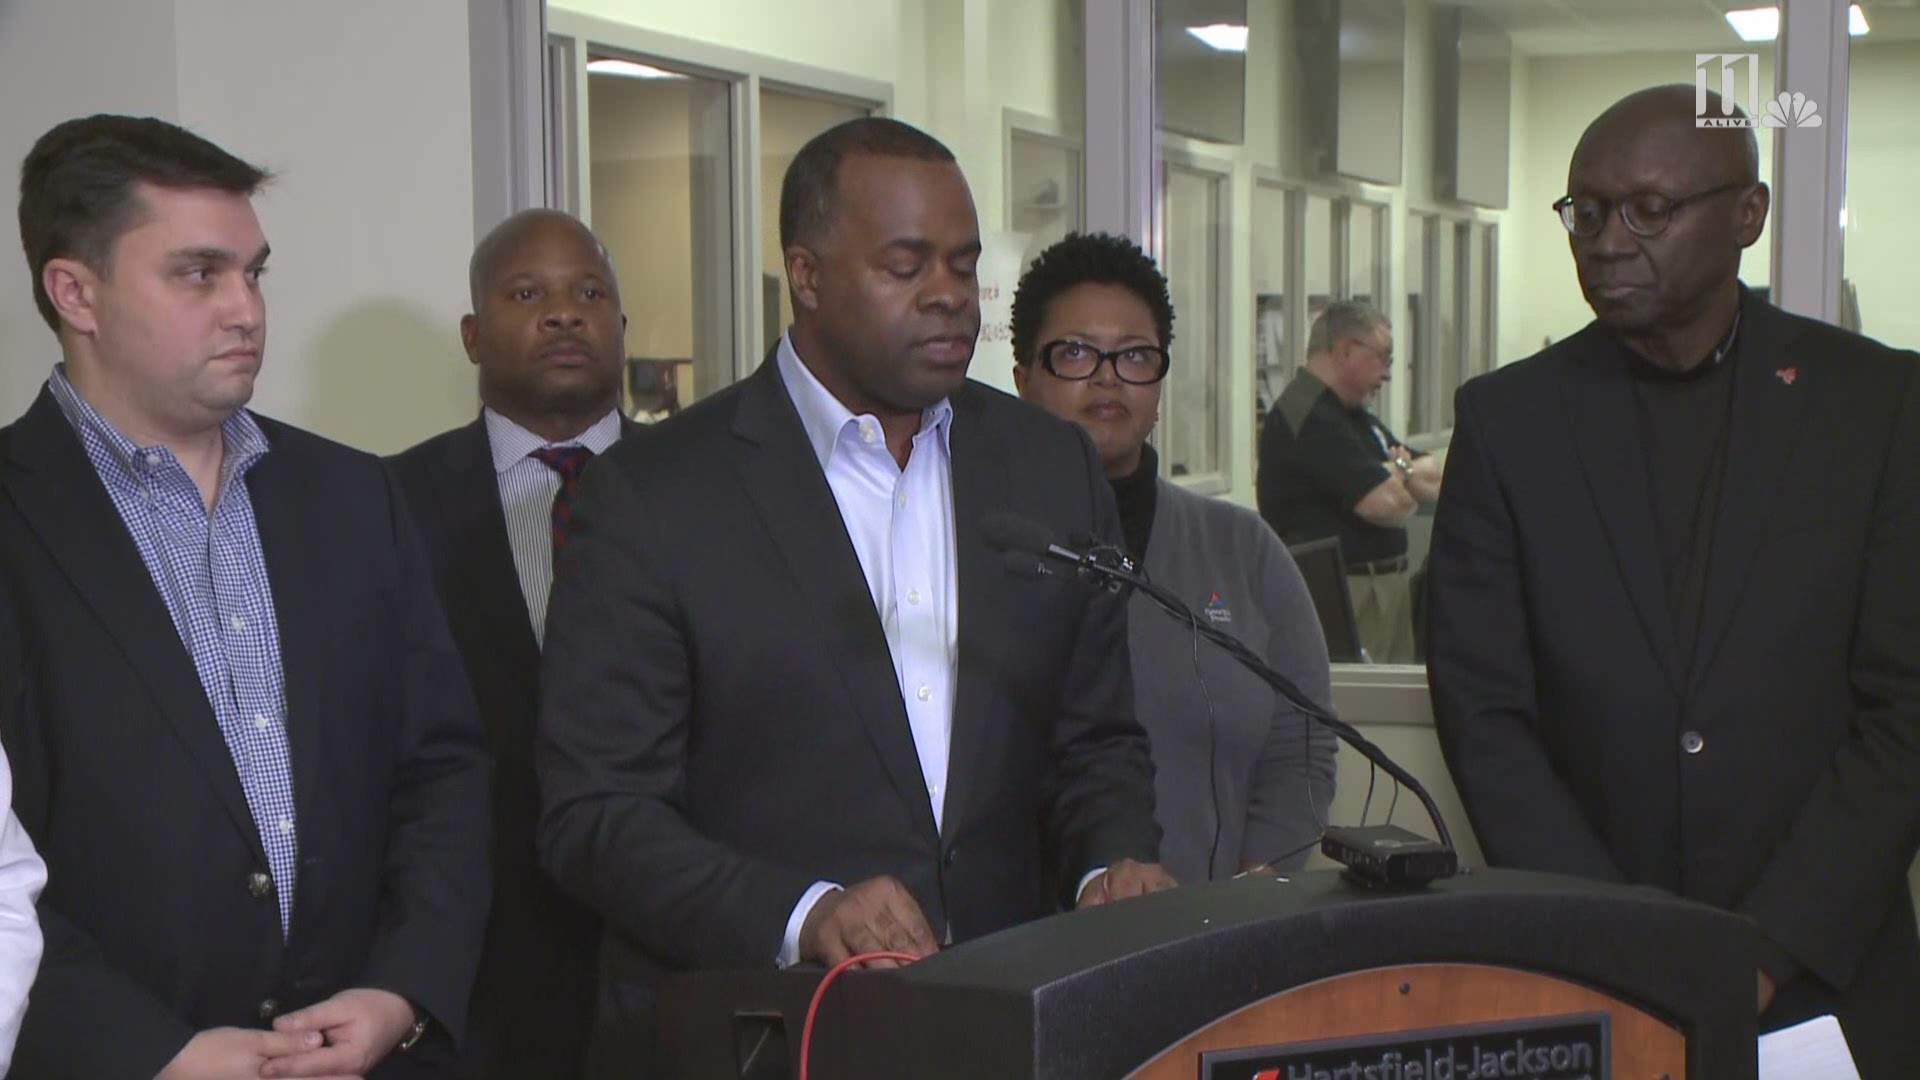 Here is what Atlanta Mayor Kasim Reed said caused the airport power outage.